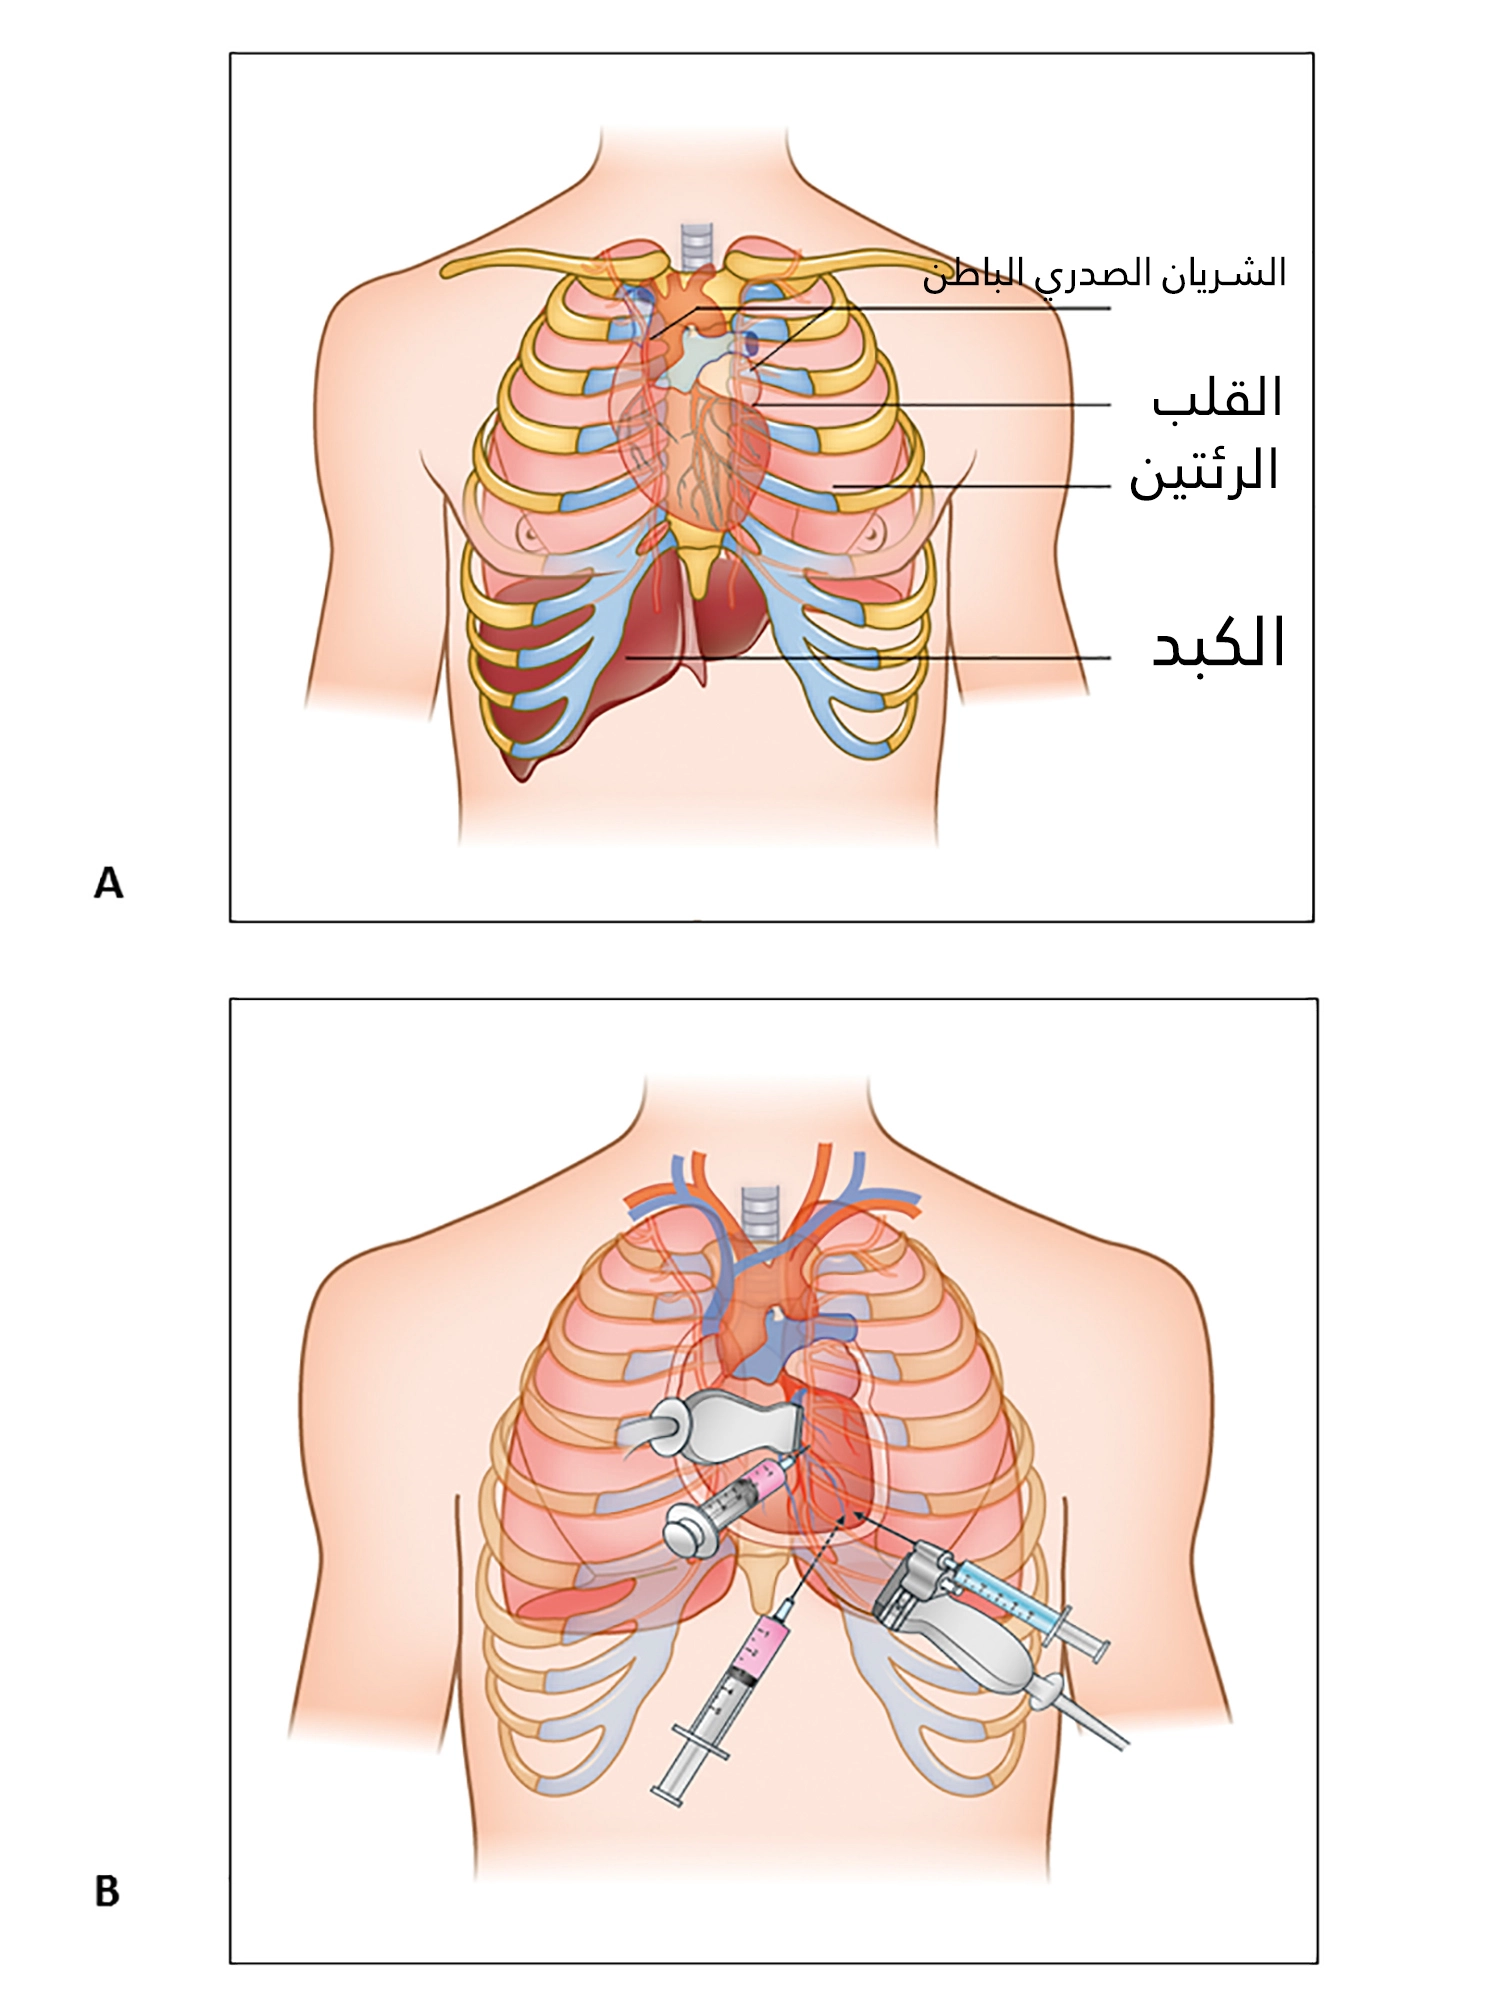 Sometimes pericardiocentesis is curative, as in the case of pericardial effusion